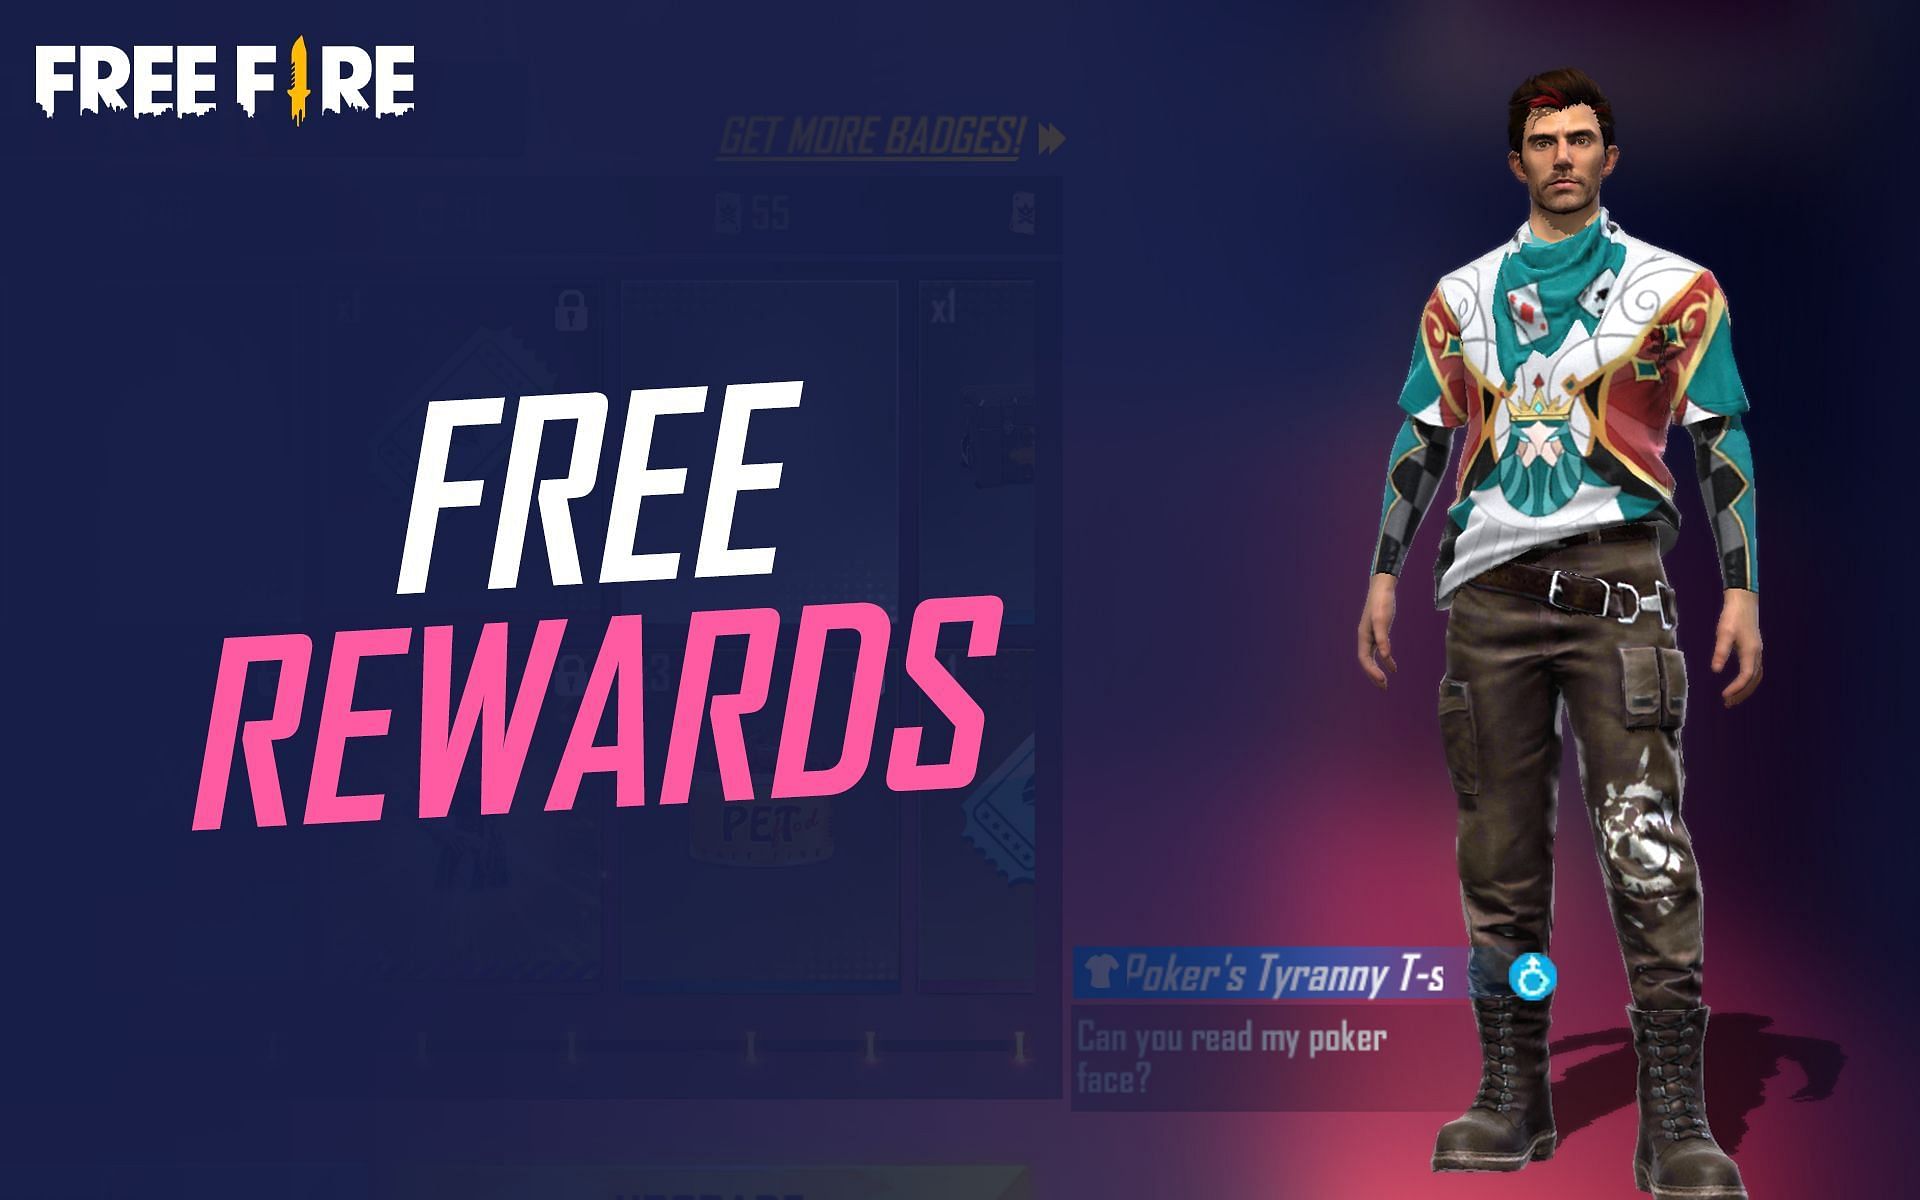 There are various free rewards available in the Elite Pass (Image via Sportskeeda)